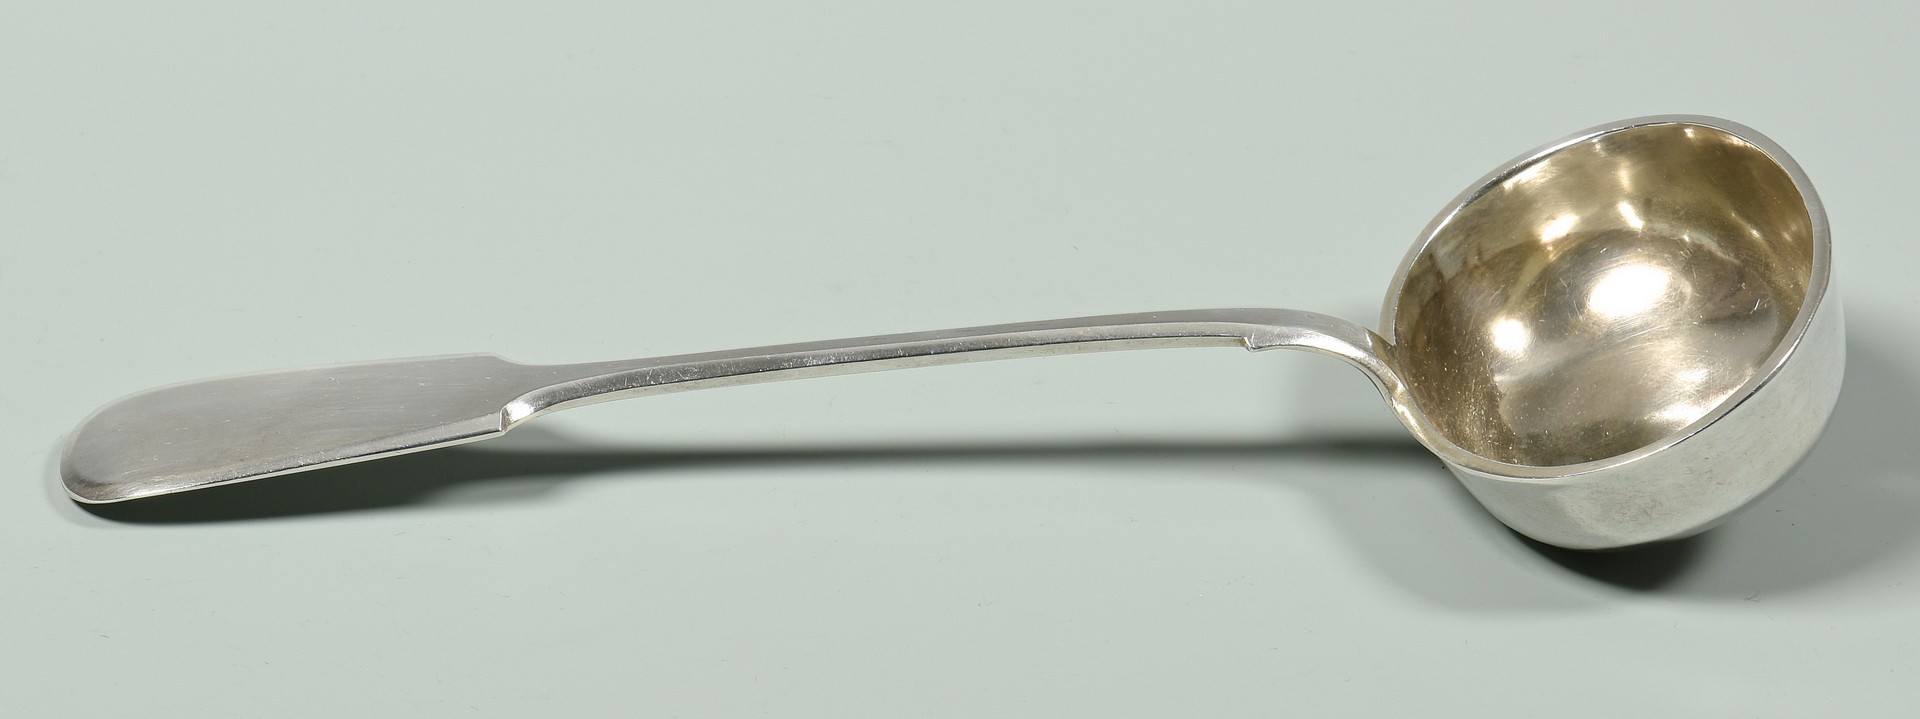 Lot 341: Russian Silver Punch Ladle